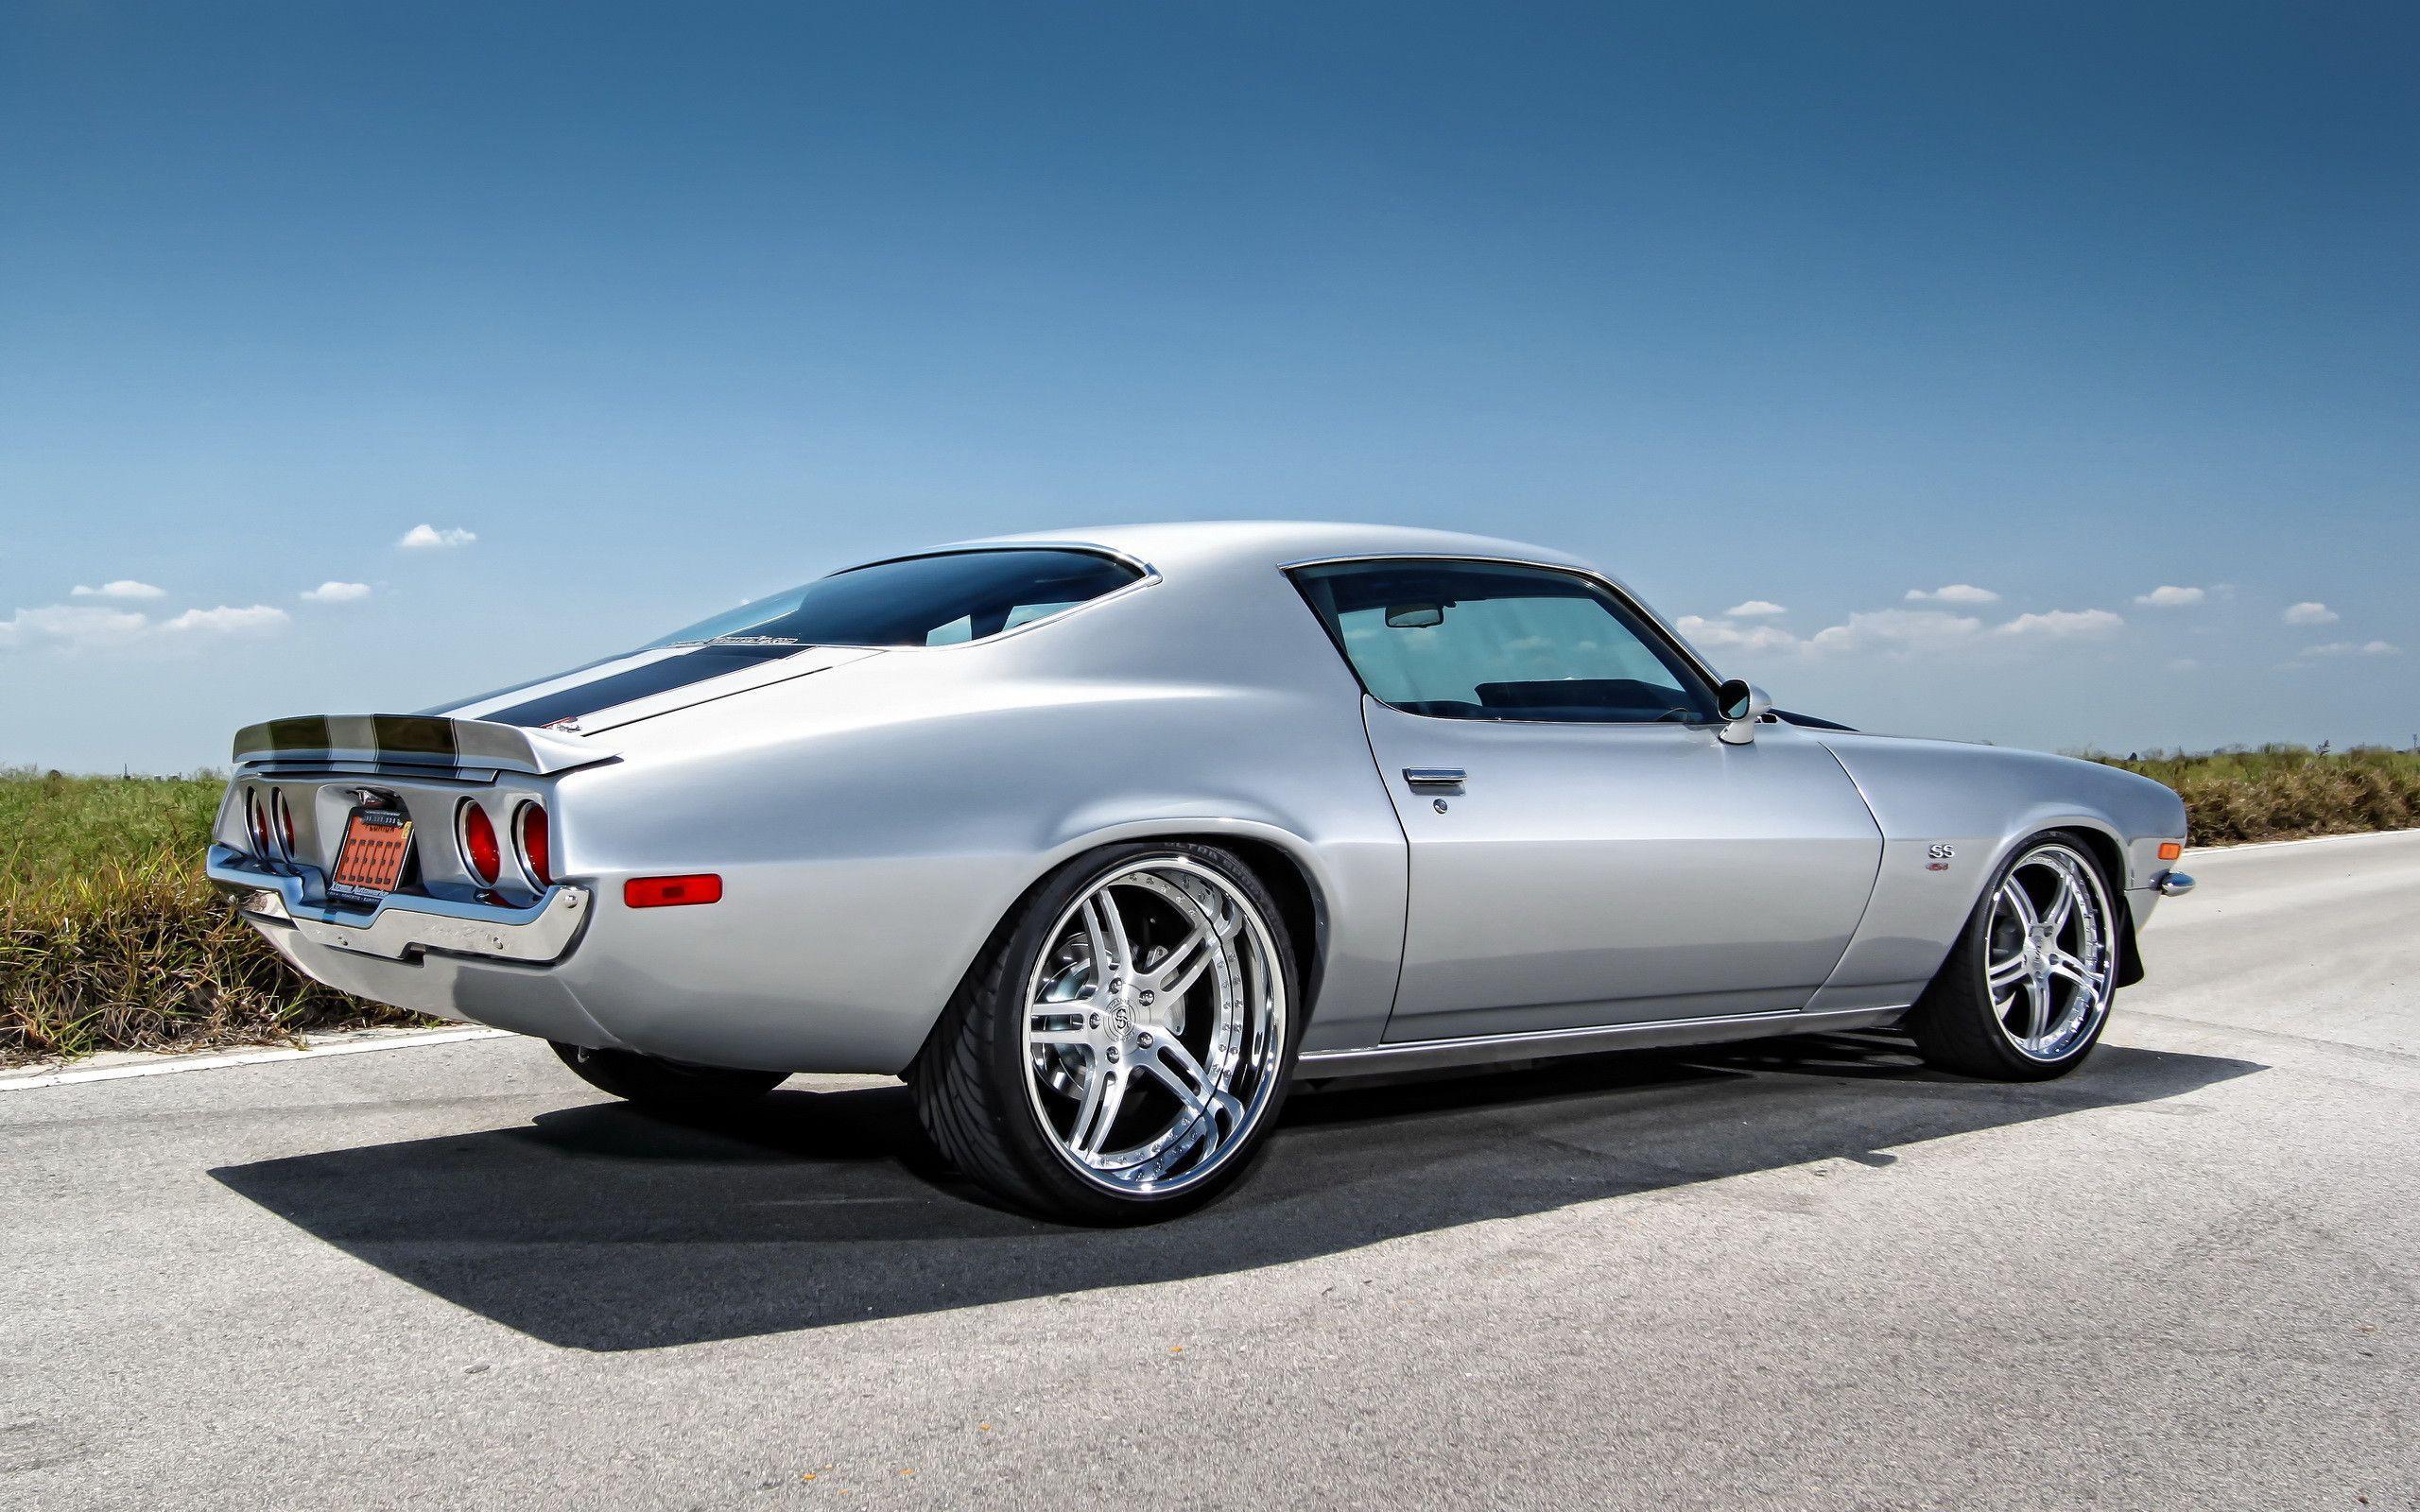 Chevy camaro muscle car Wallpaper Picture Photo Image